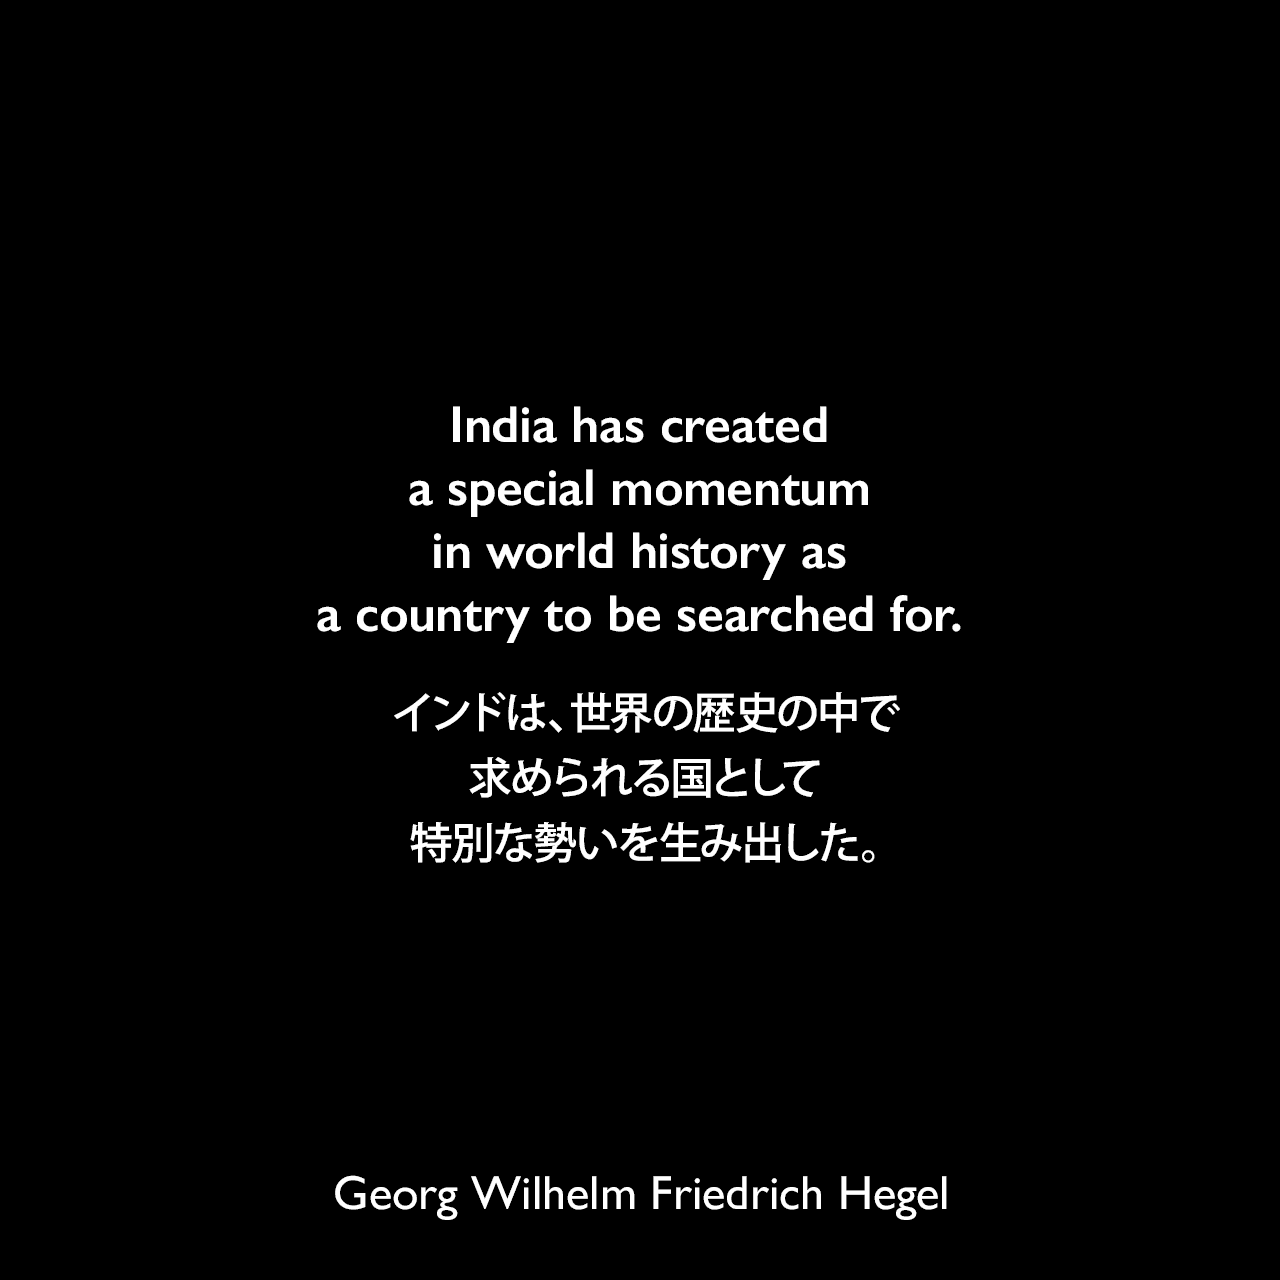 India has created a special momentum in world history as a country to be searched for.インドは、世界の歴史の中で求められる国として特別な勢いを生み出した。- クラウス・クロスターマイアーによる本「A survey of Hinduism」よりGeorg Wilhelm Friedrich Hegel